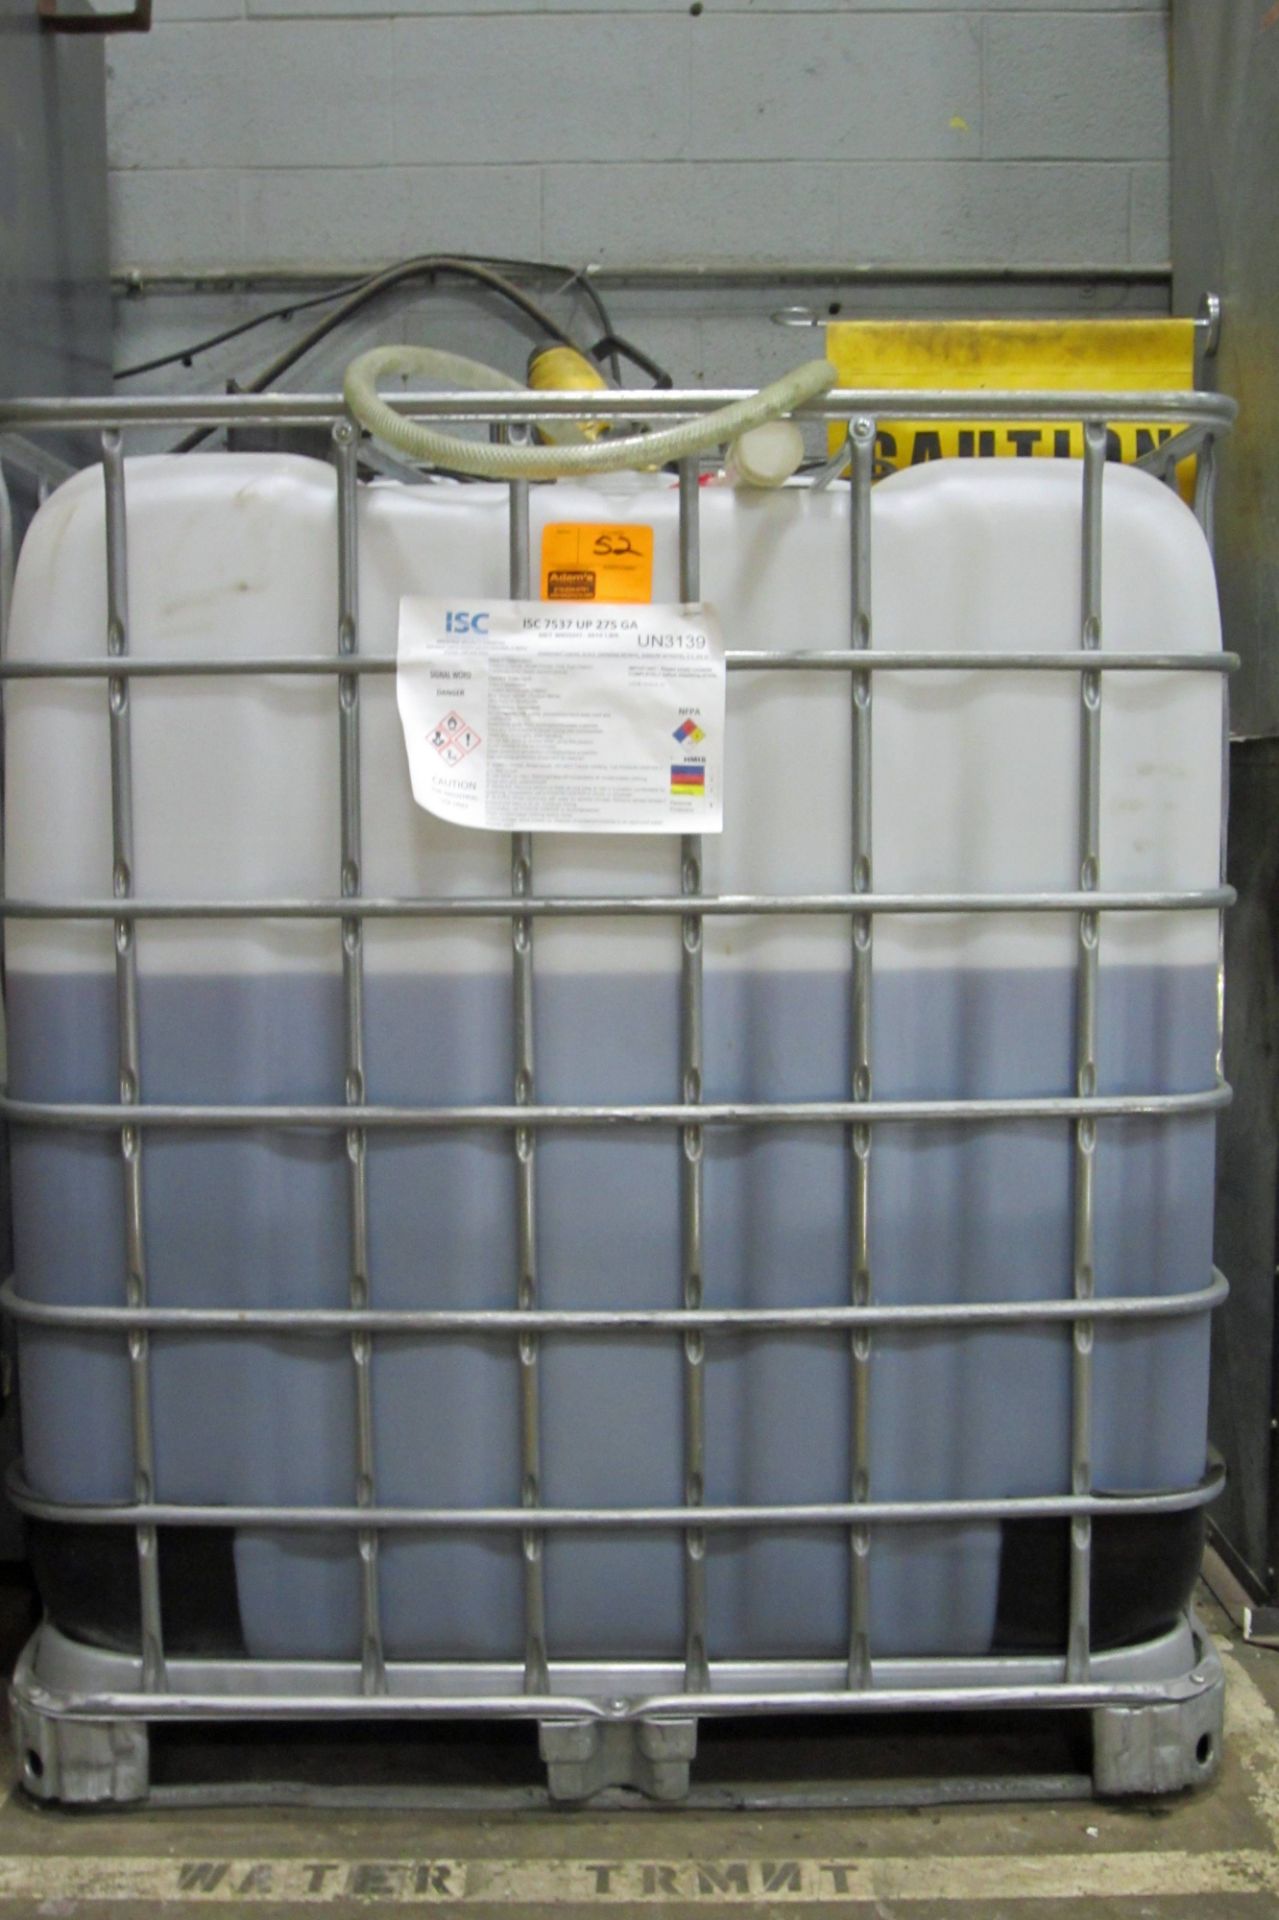 1/2 FULL TANK OXIDIZING LIQUID-BUYER IS RESPONSIBLE FOR SAFE TRANSPORTATION